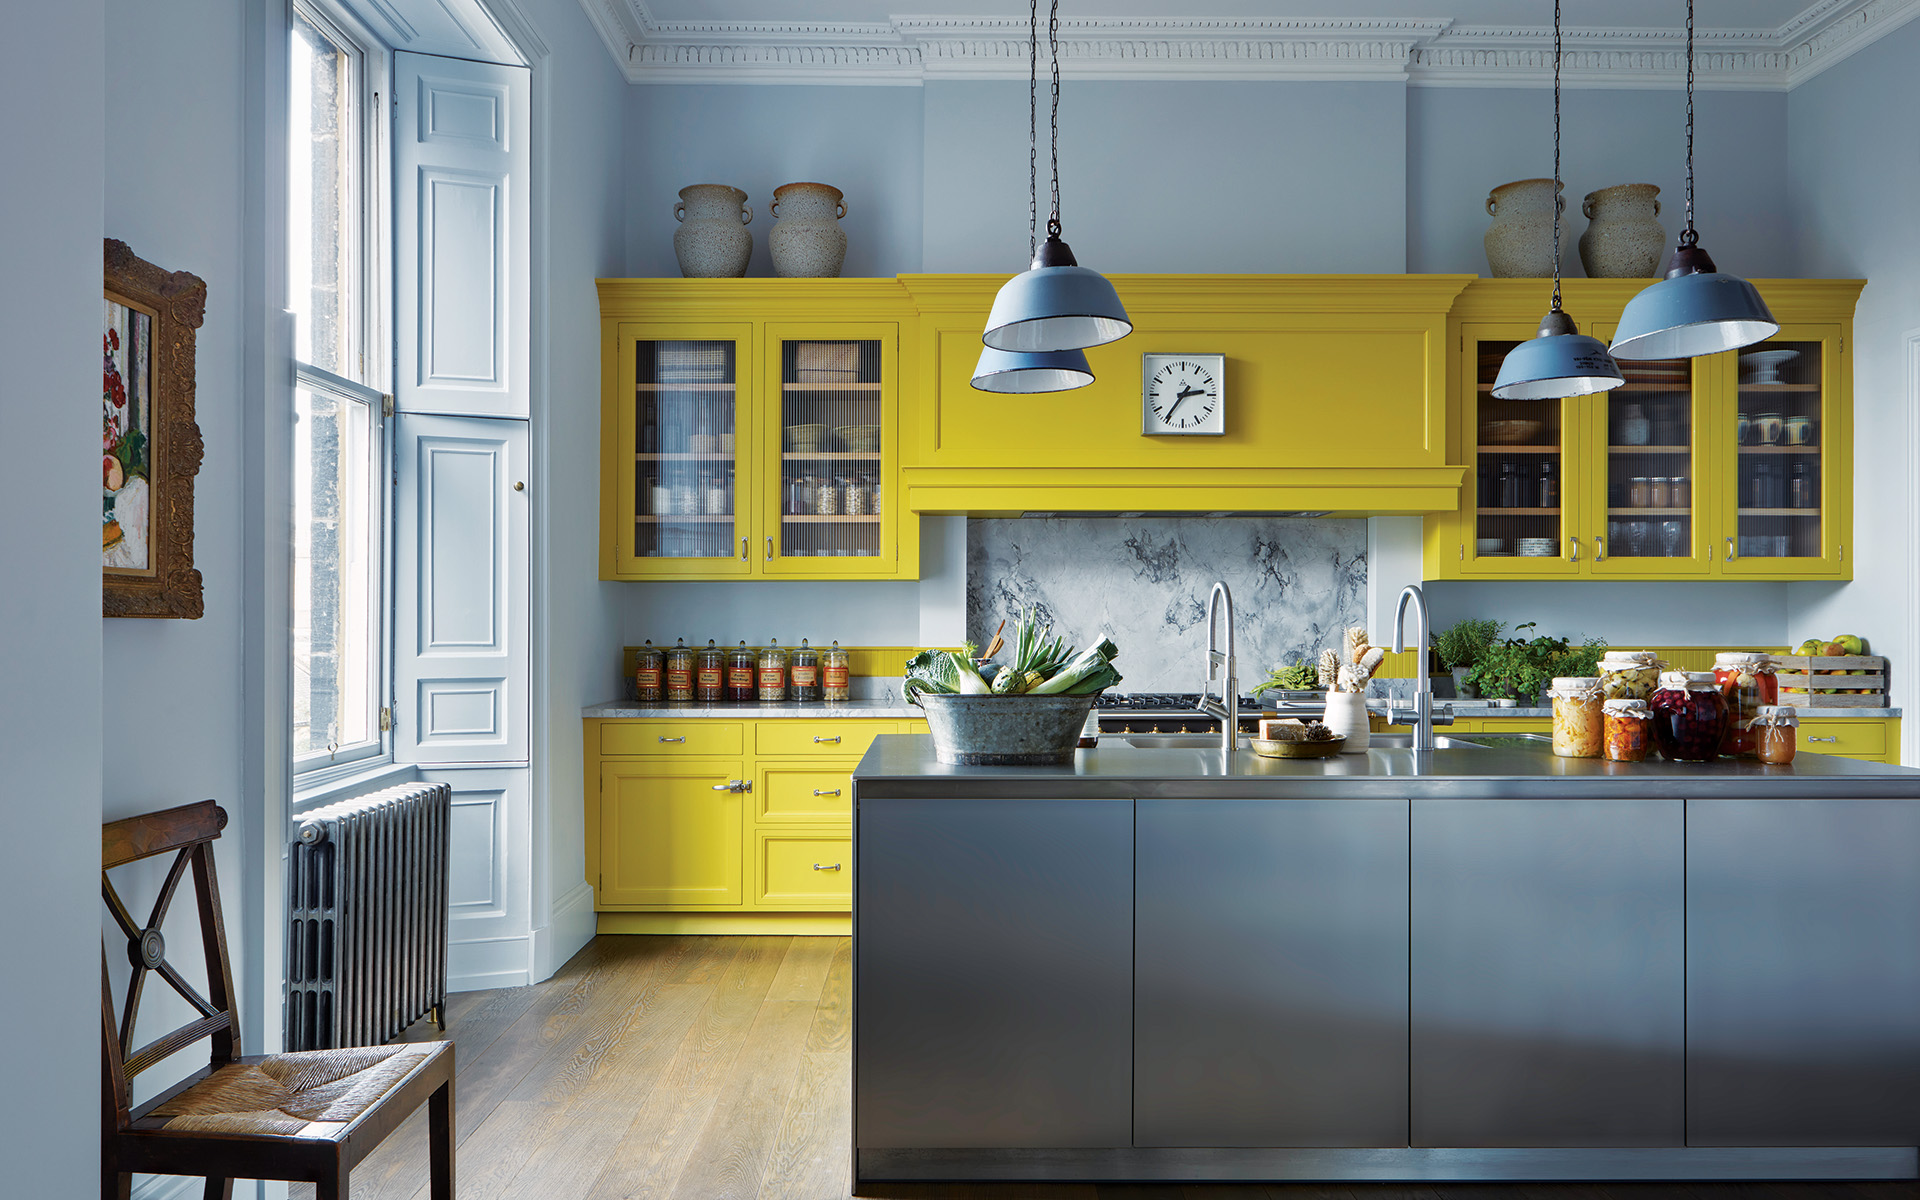 6 Interior Design Experts Reveal How to Craft a Dream Kitchen - Galerie